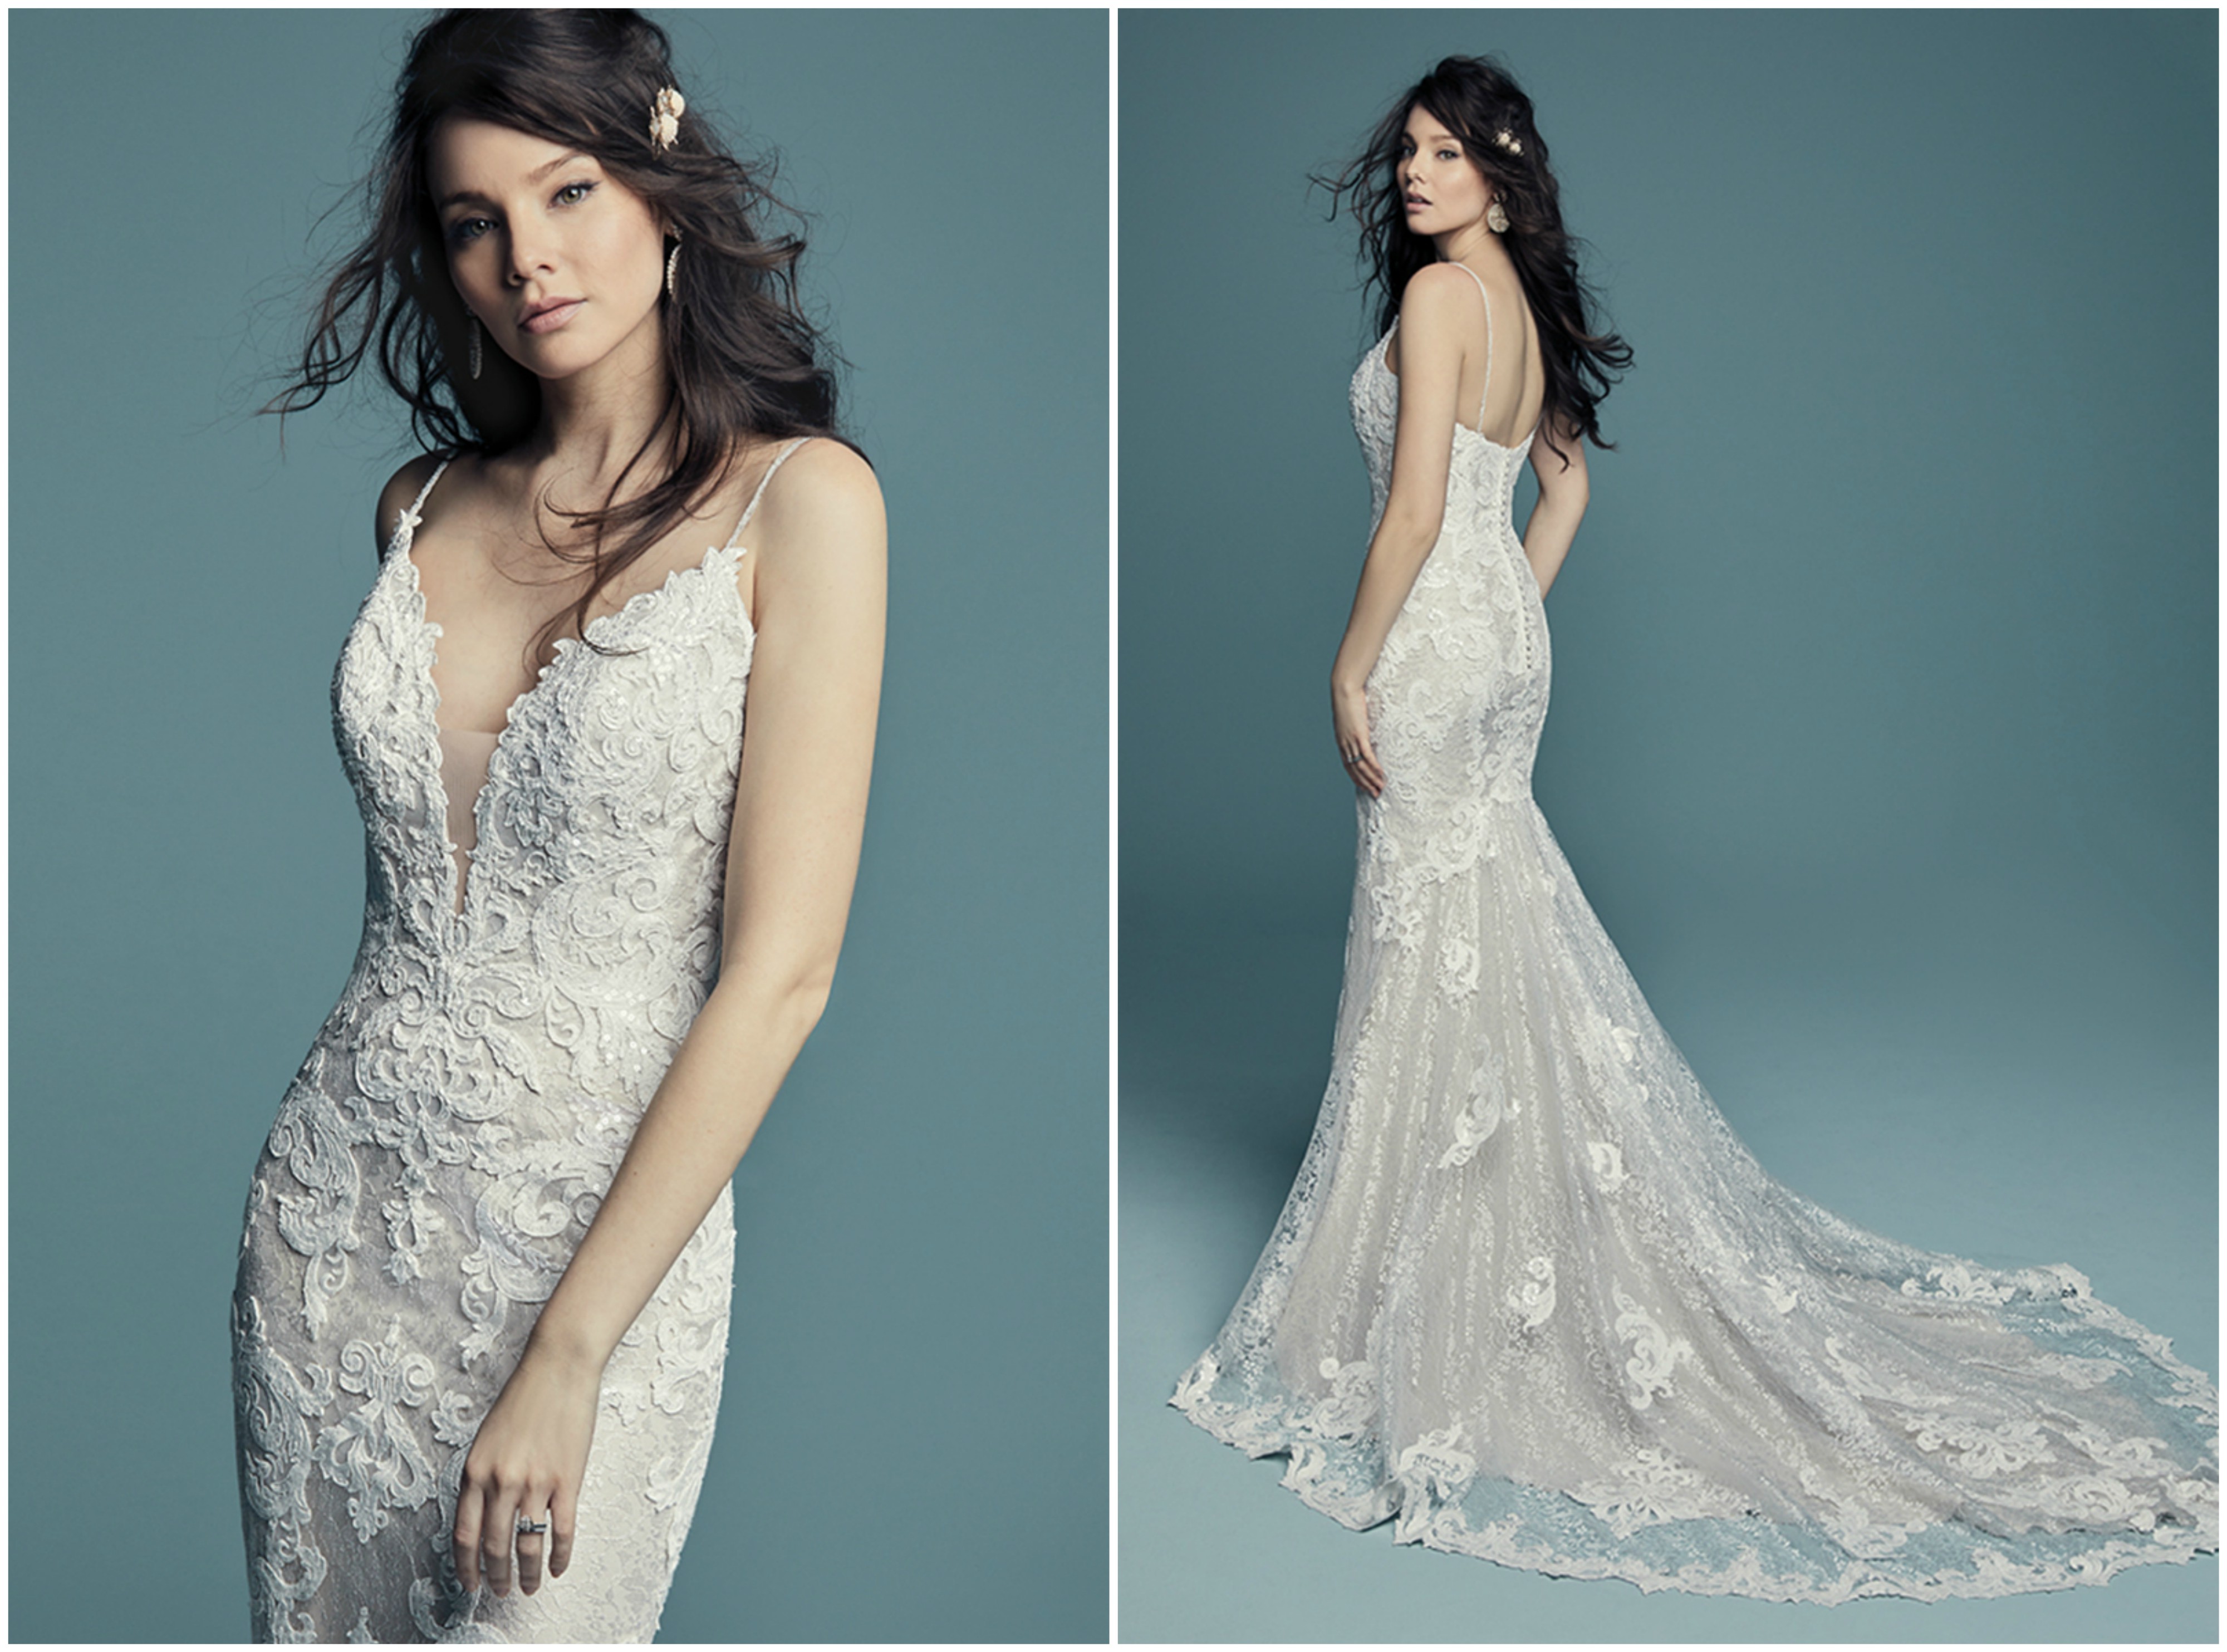 <a href="https://www.maggiesottero.com/maggie-sottero/tuscany/11513" target="_blank">Maggie Sottero</a>